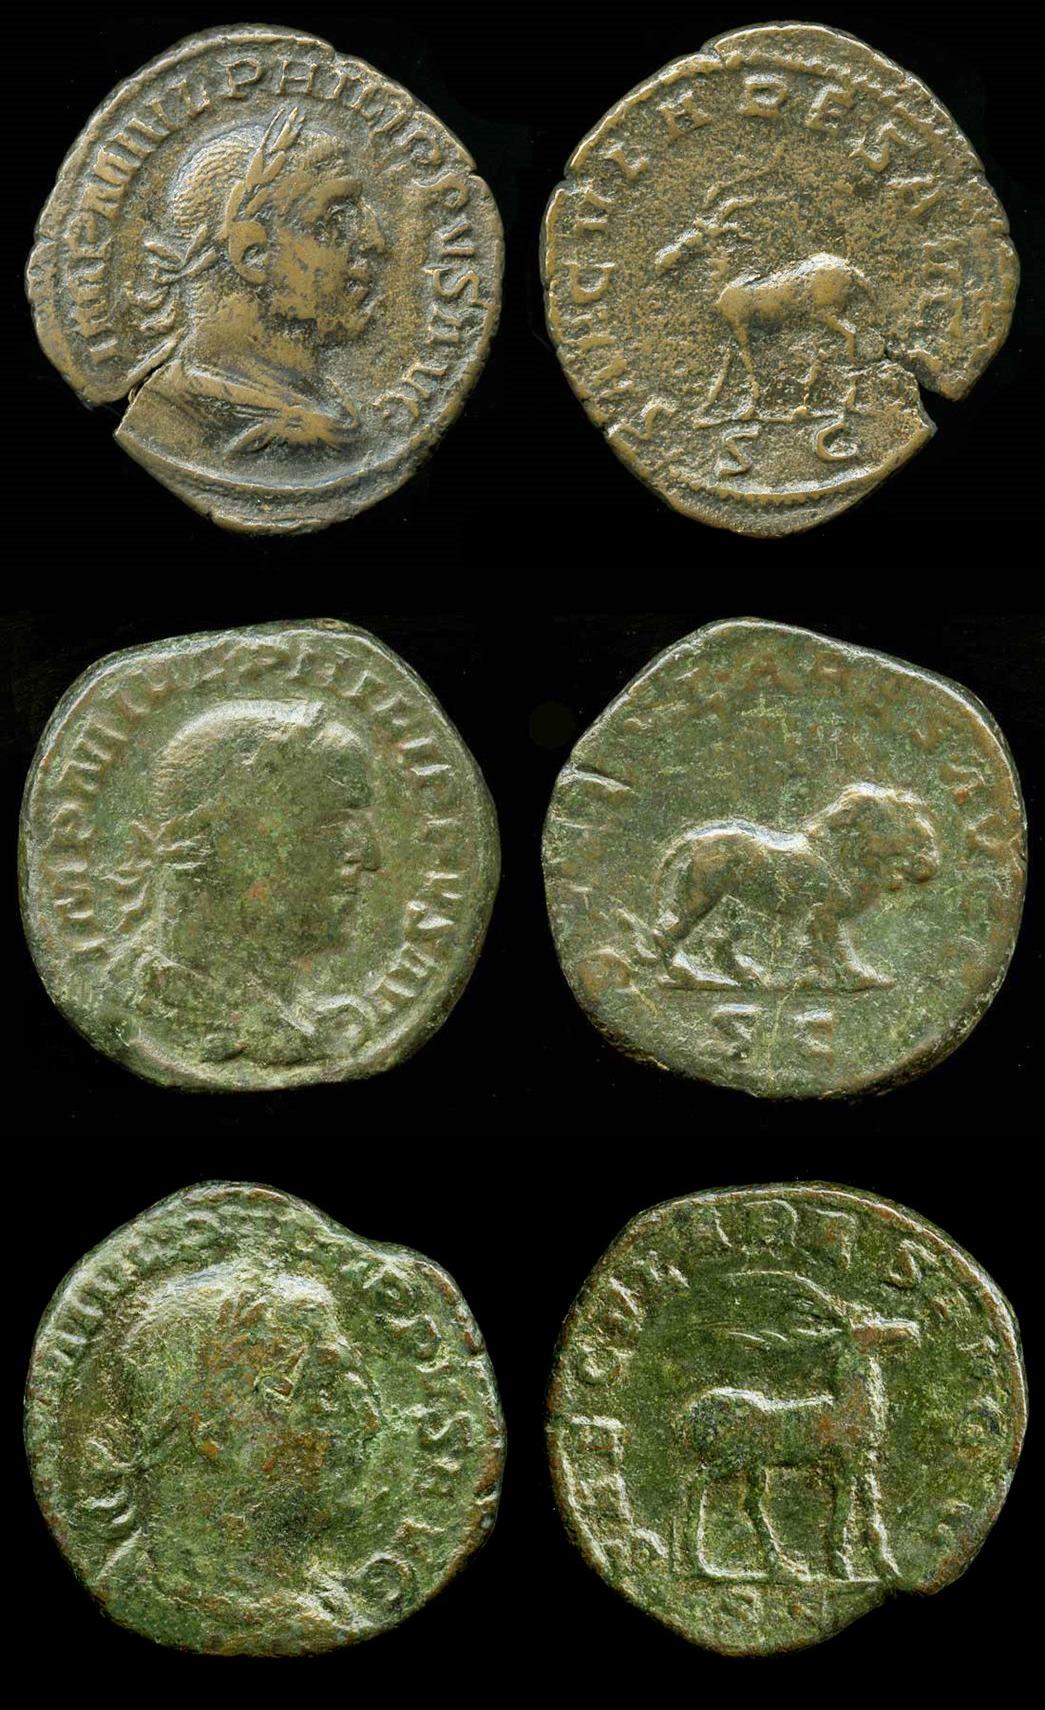 Three AD 248 Roman copper alloy coins — called sestertius — depicting an antelope, lion and stag (top-to-bottom) on one side and Emperor Philip I’s profile on the other. (ID nos.: N624; N639; N623) 